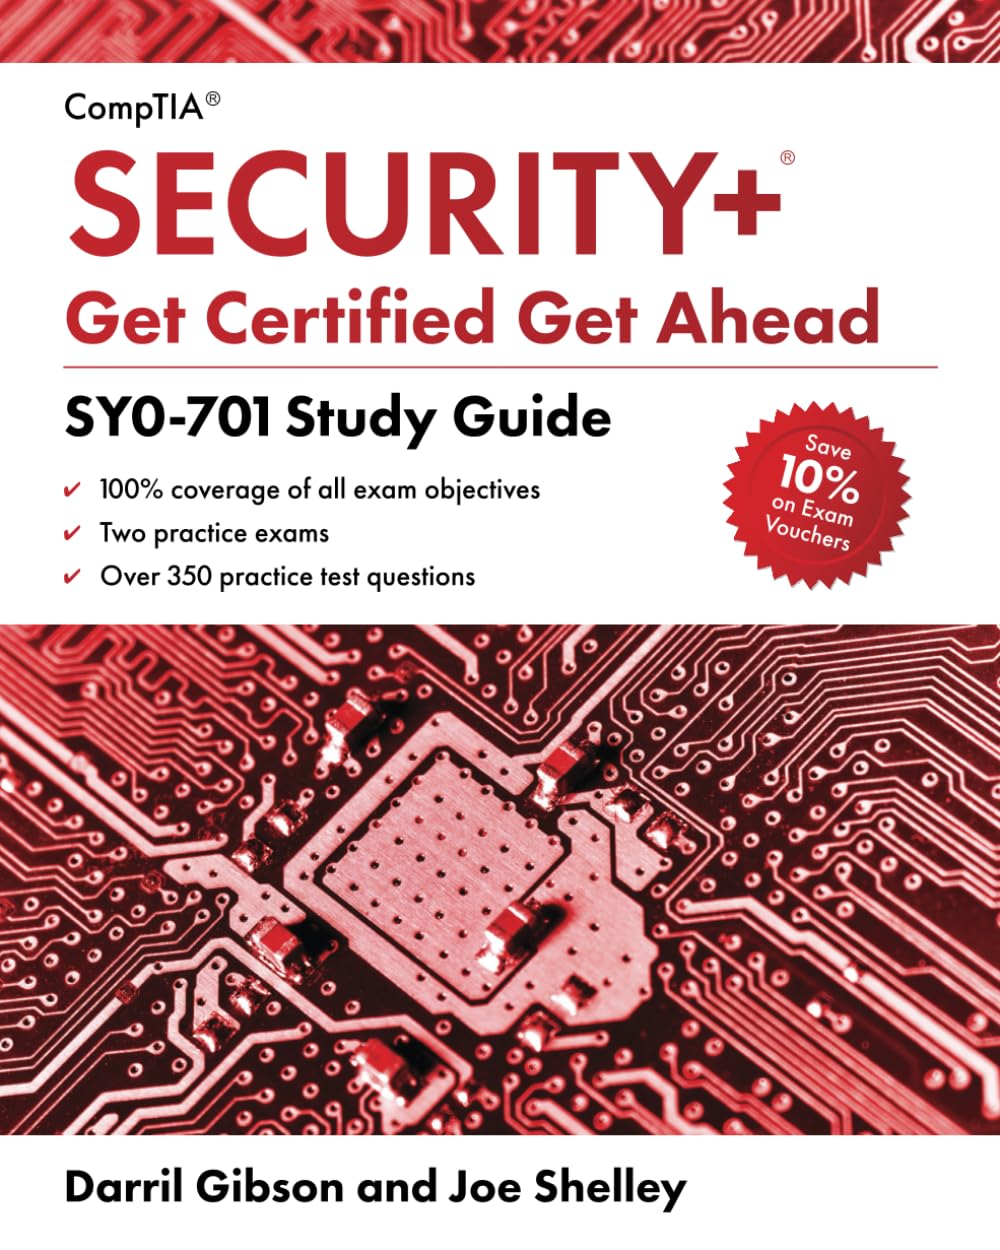 CompTIA Security+ Get Certified Get Ahead: SY0-701 Study Guide